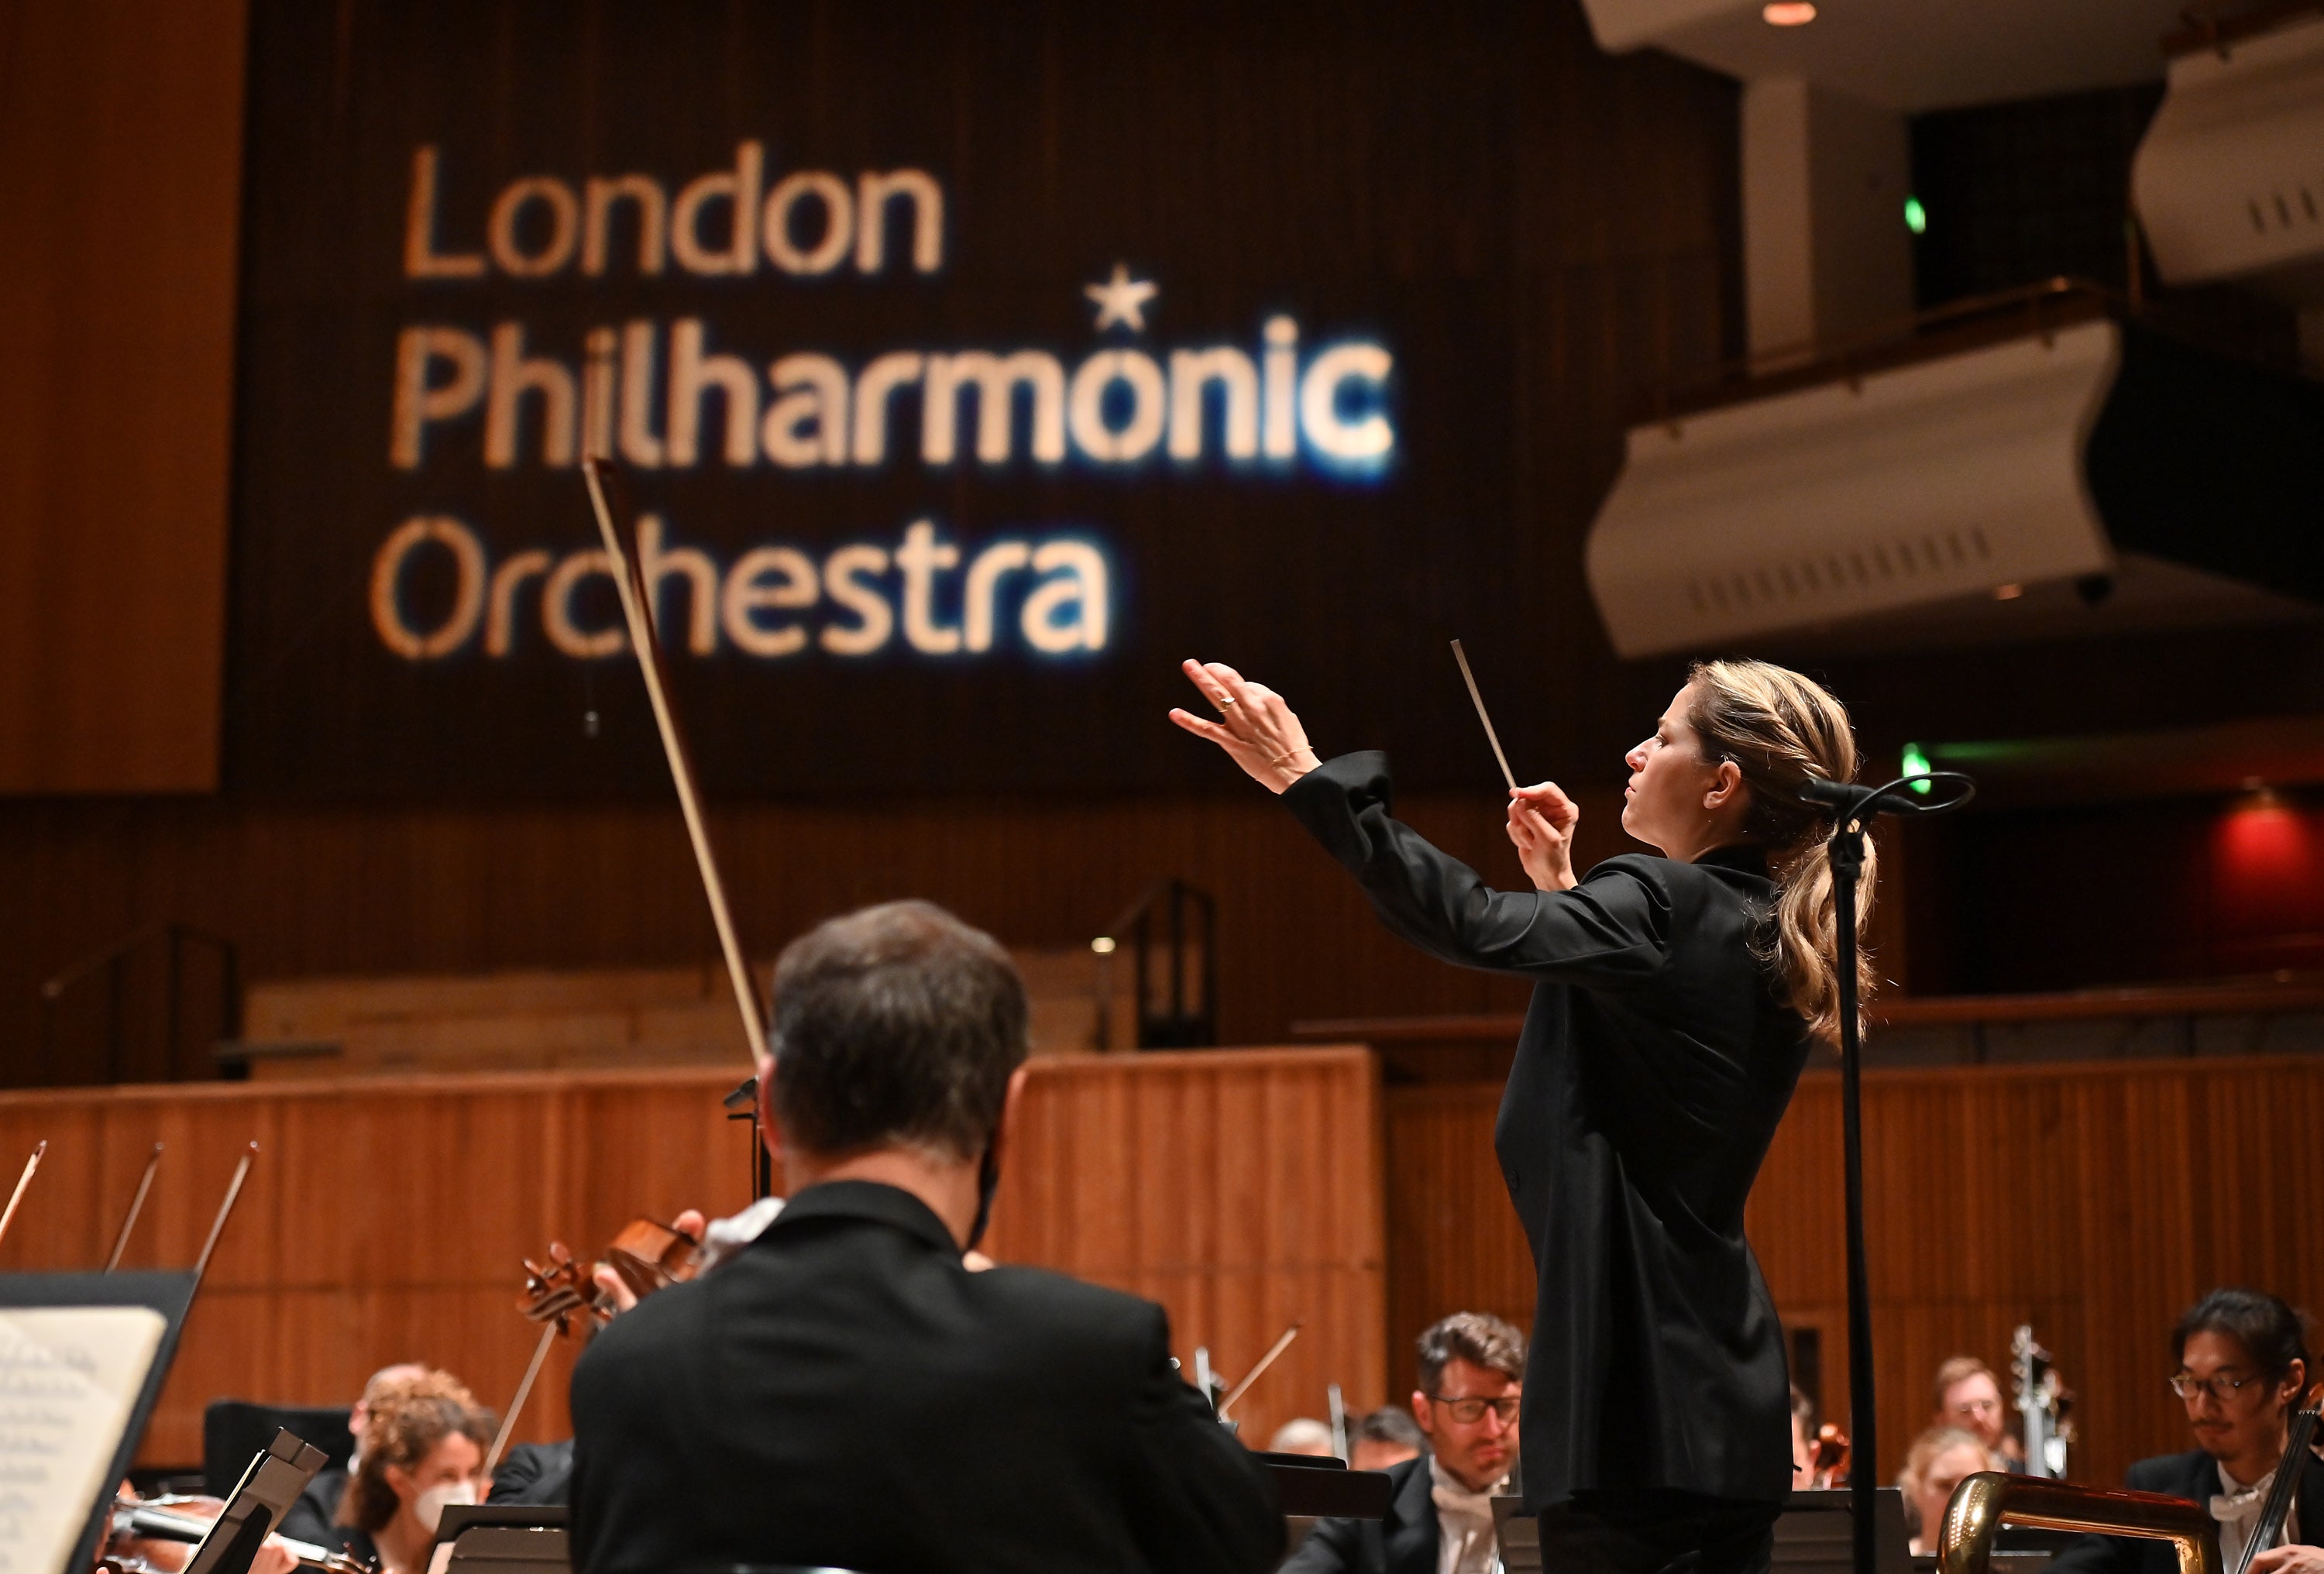 The London Philharmonic Orchestra perform Beethoven’s Piano Concerto No.3 with soloist Stephen Hough and Shostakovich Symphony No.10, conducted by Principal Guest Conductor Karina Canellakis